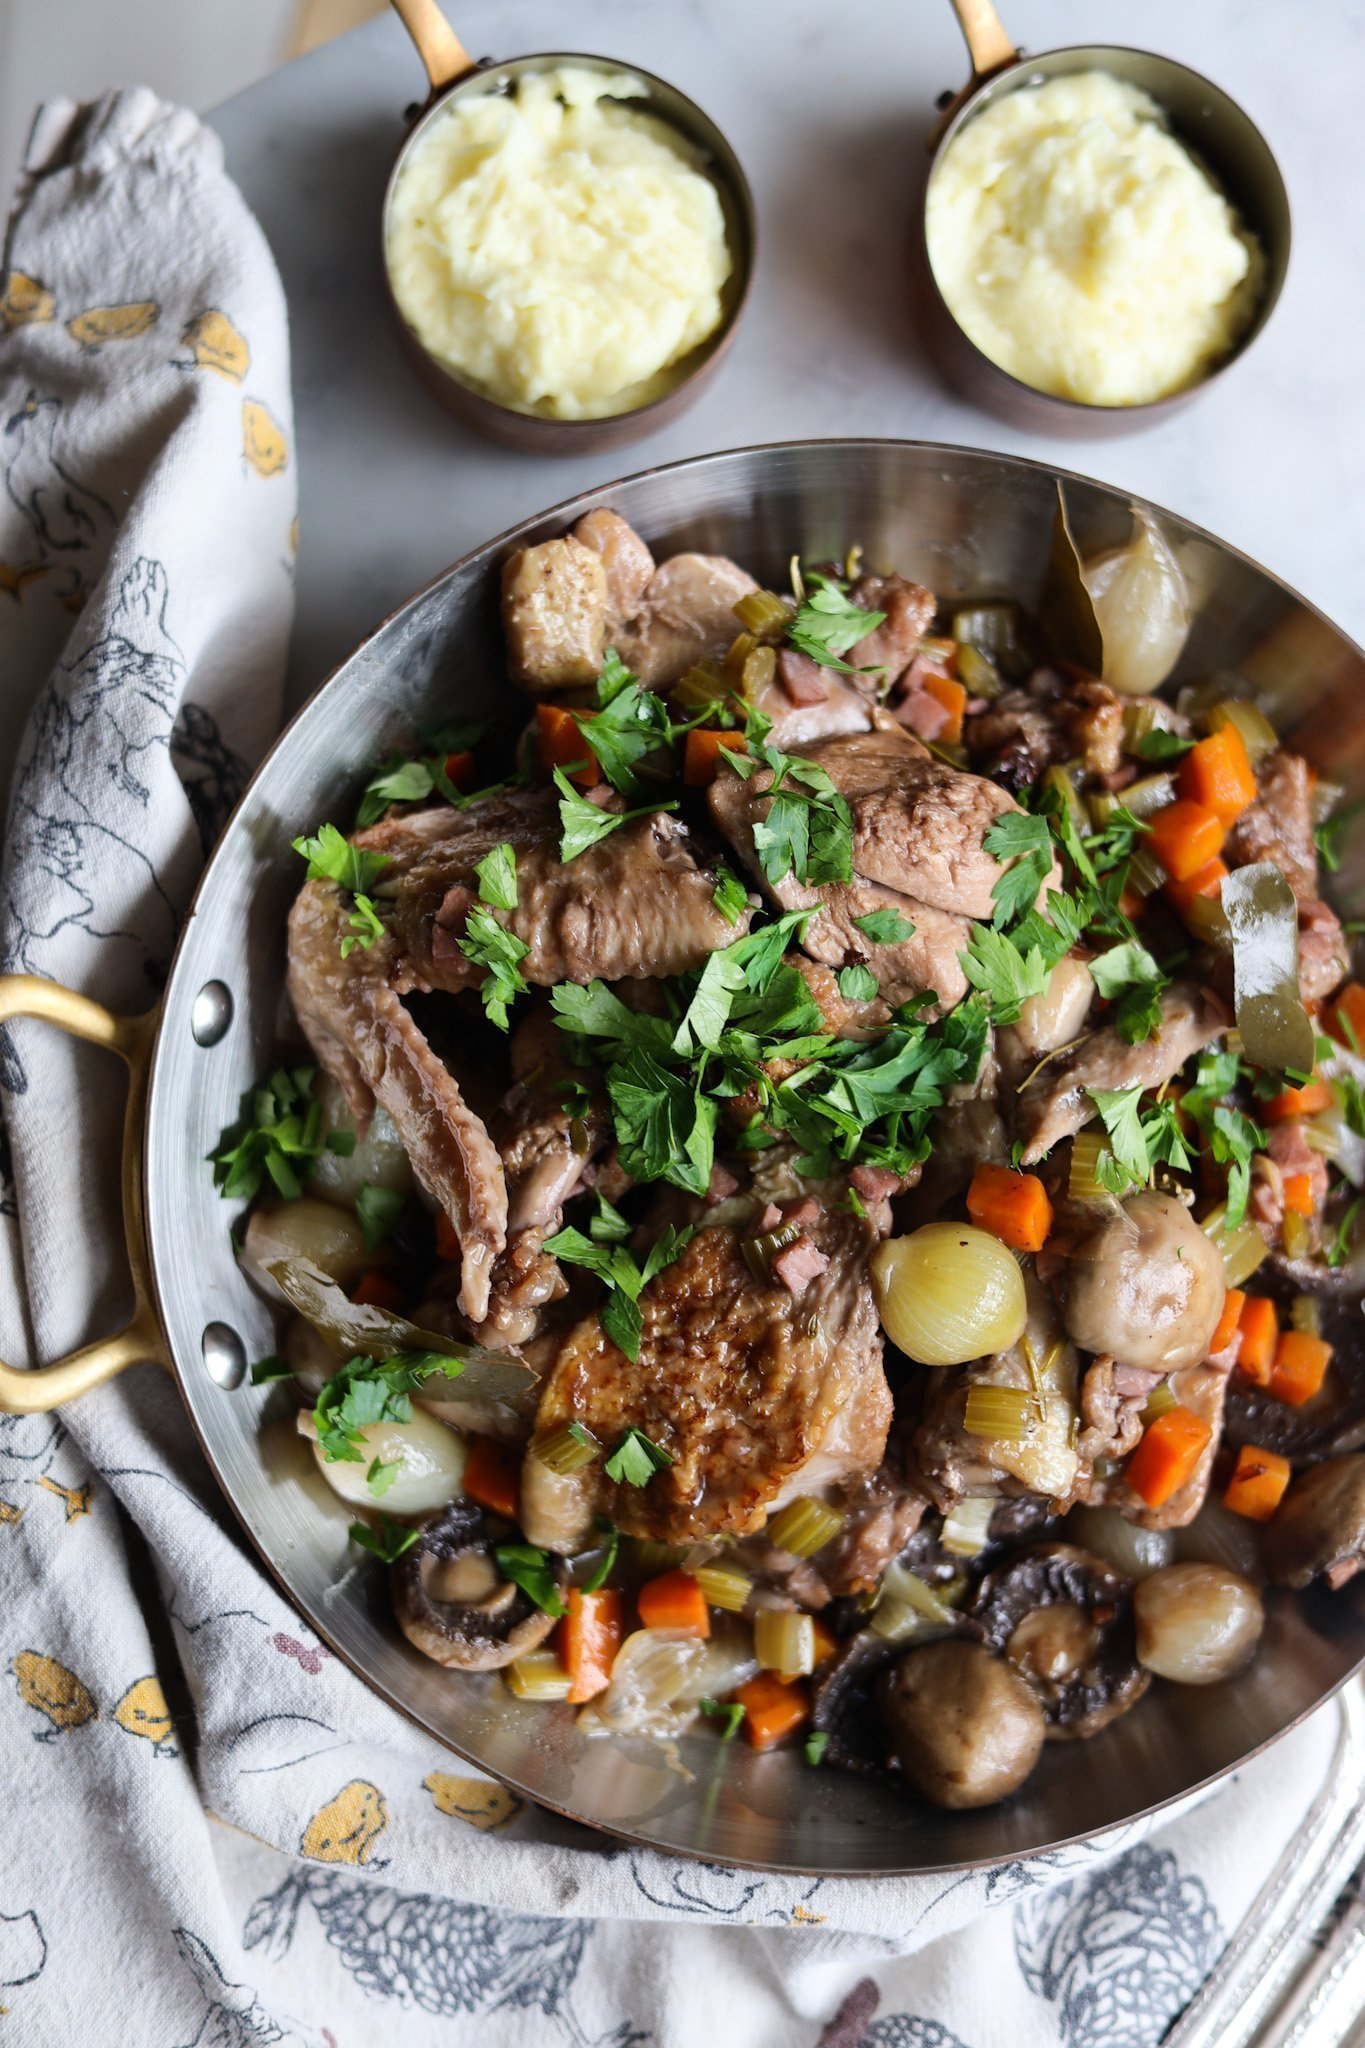 Coq au Vin with mushrooms, chicken, onions and parsley served with mashed potatoes